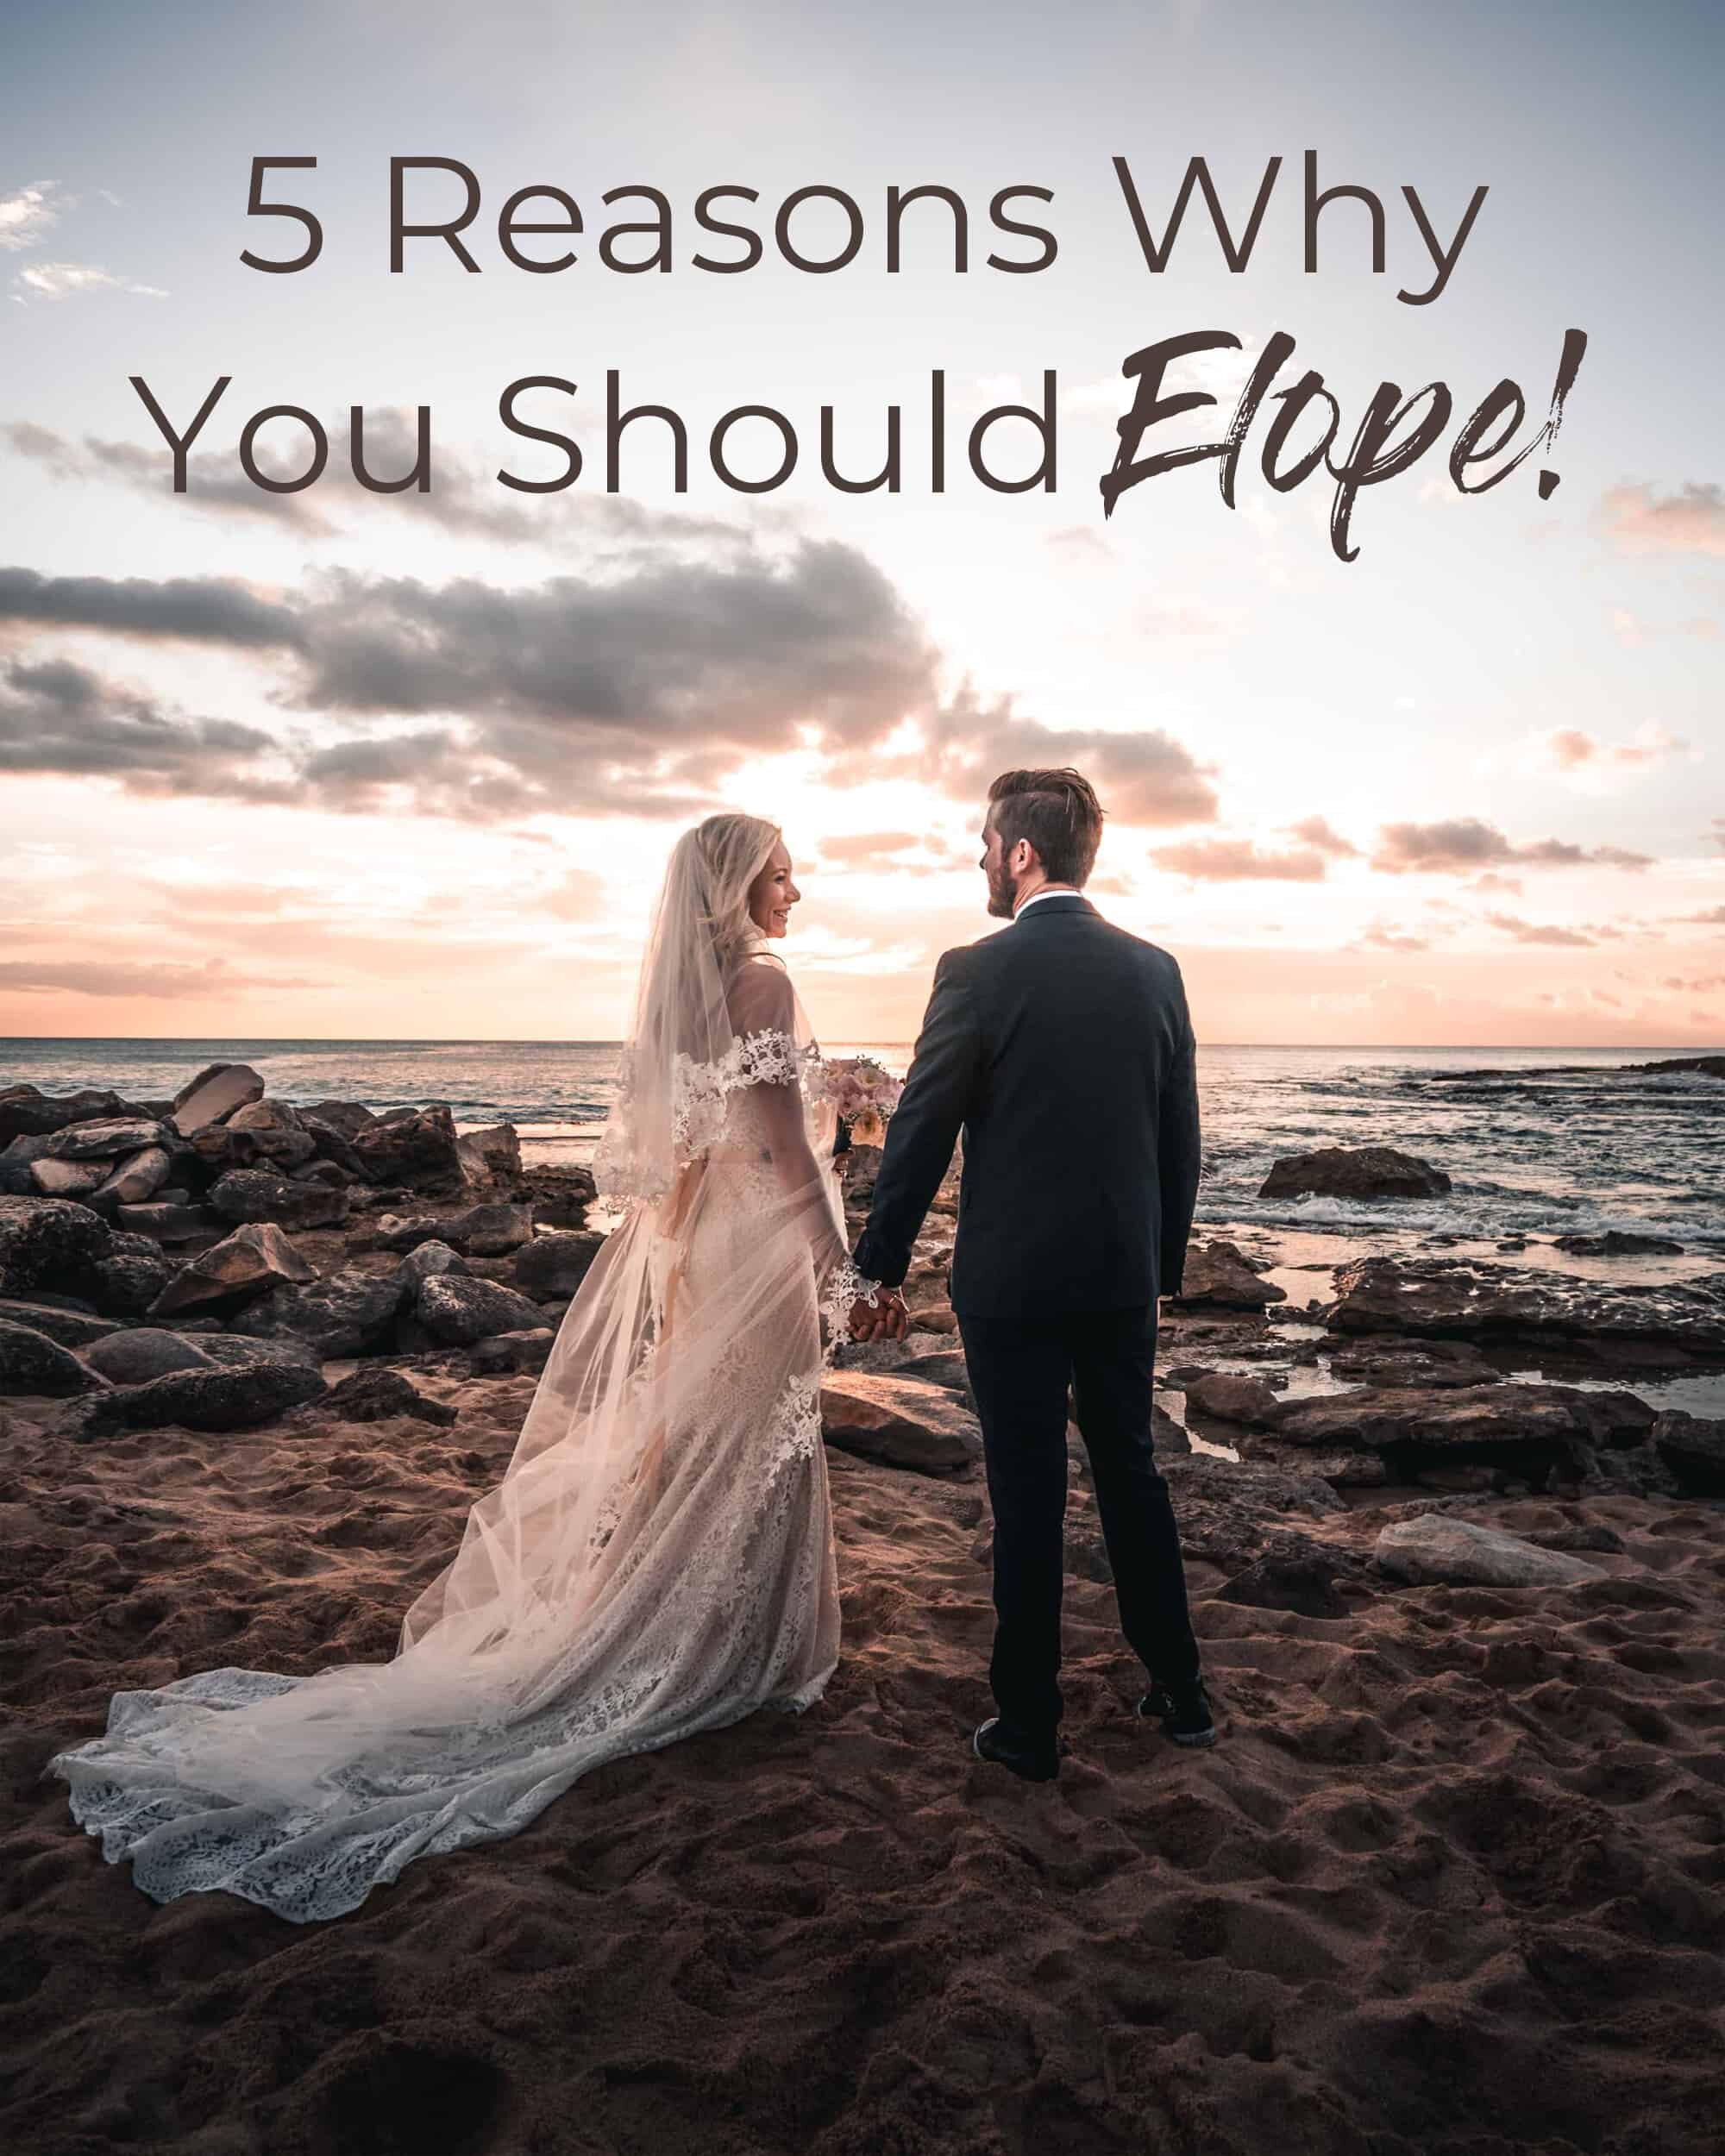 5 reasons why you should elope!